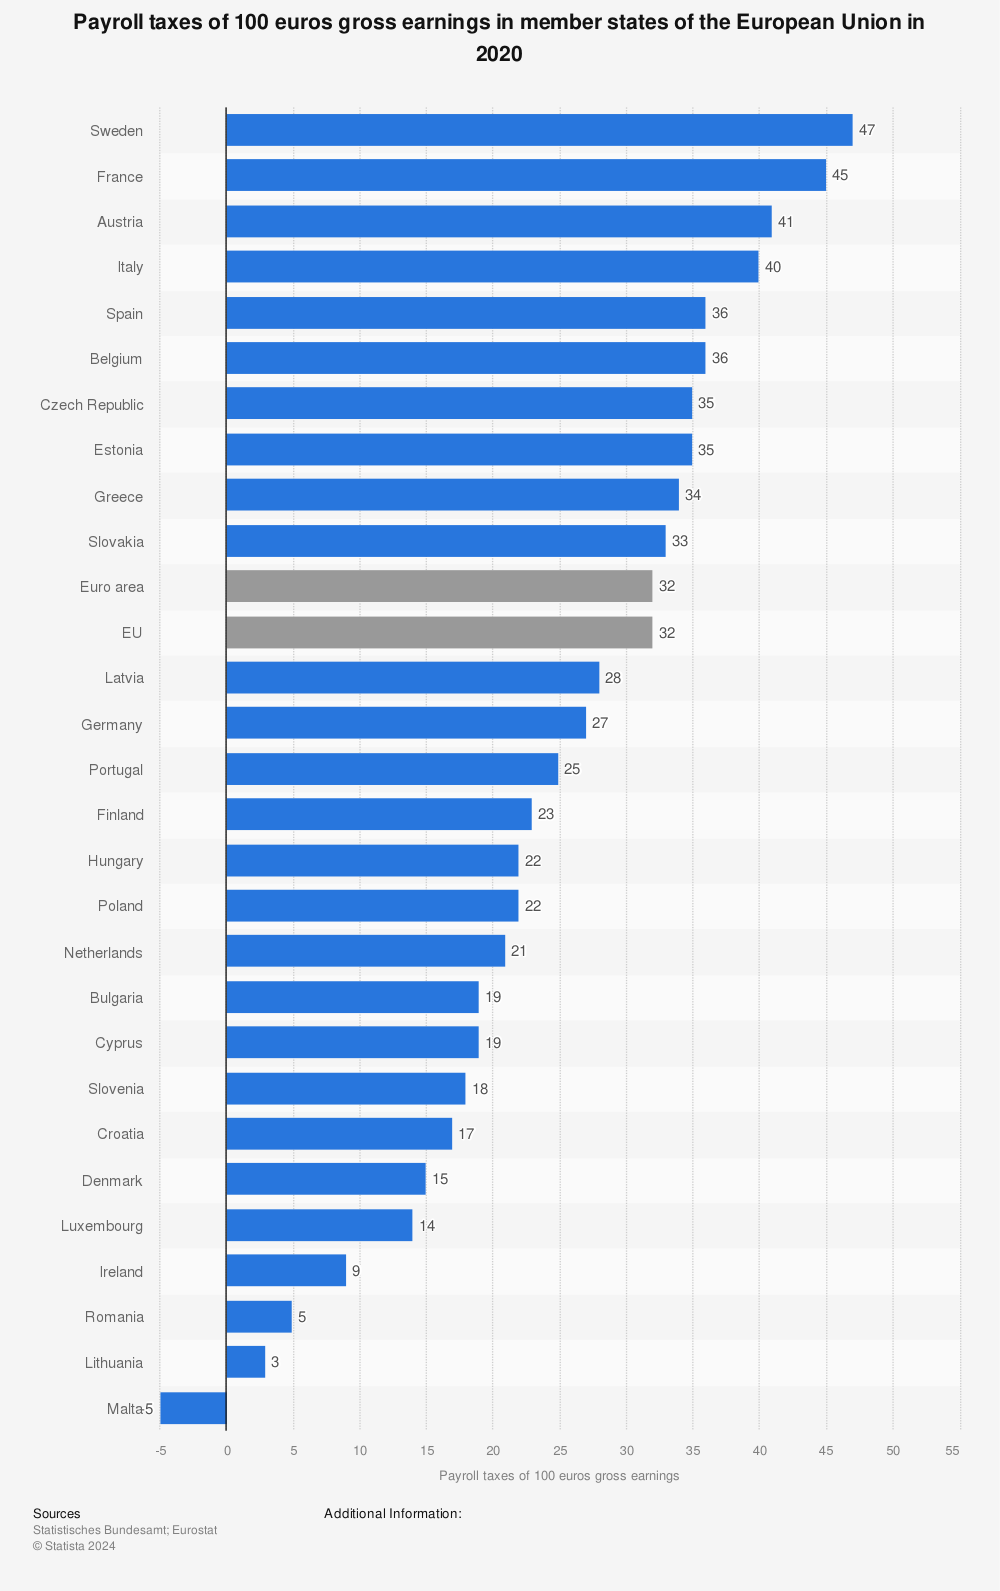 Statistic: Payroll taxes of 100 euros gross earnings in member states of the European Union in 2020 | Statista